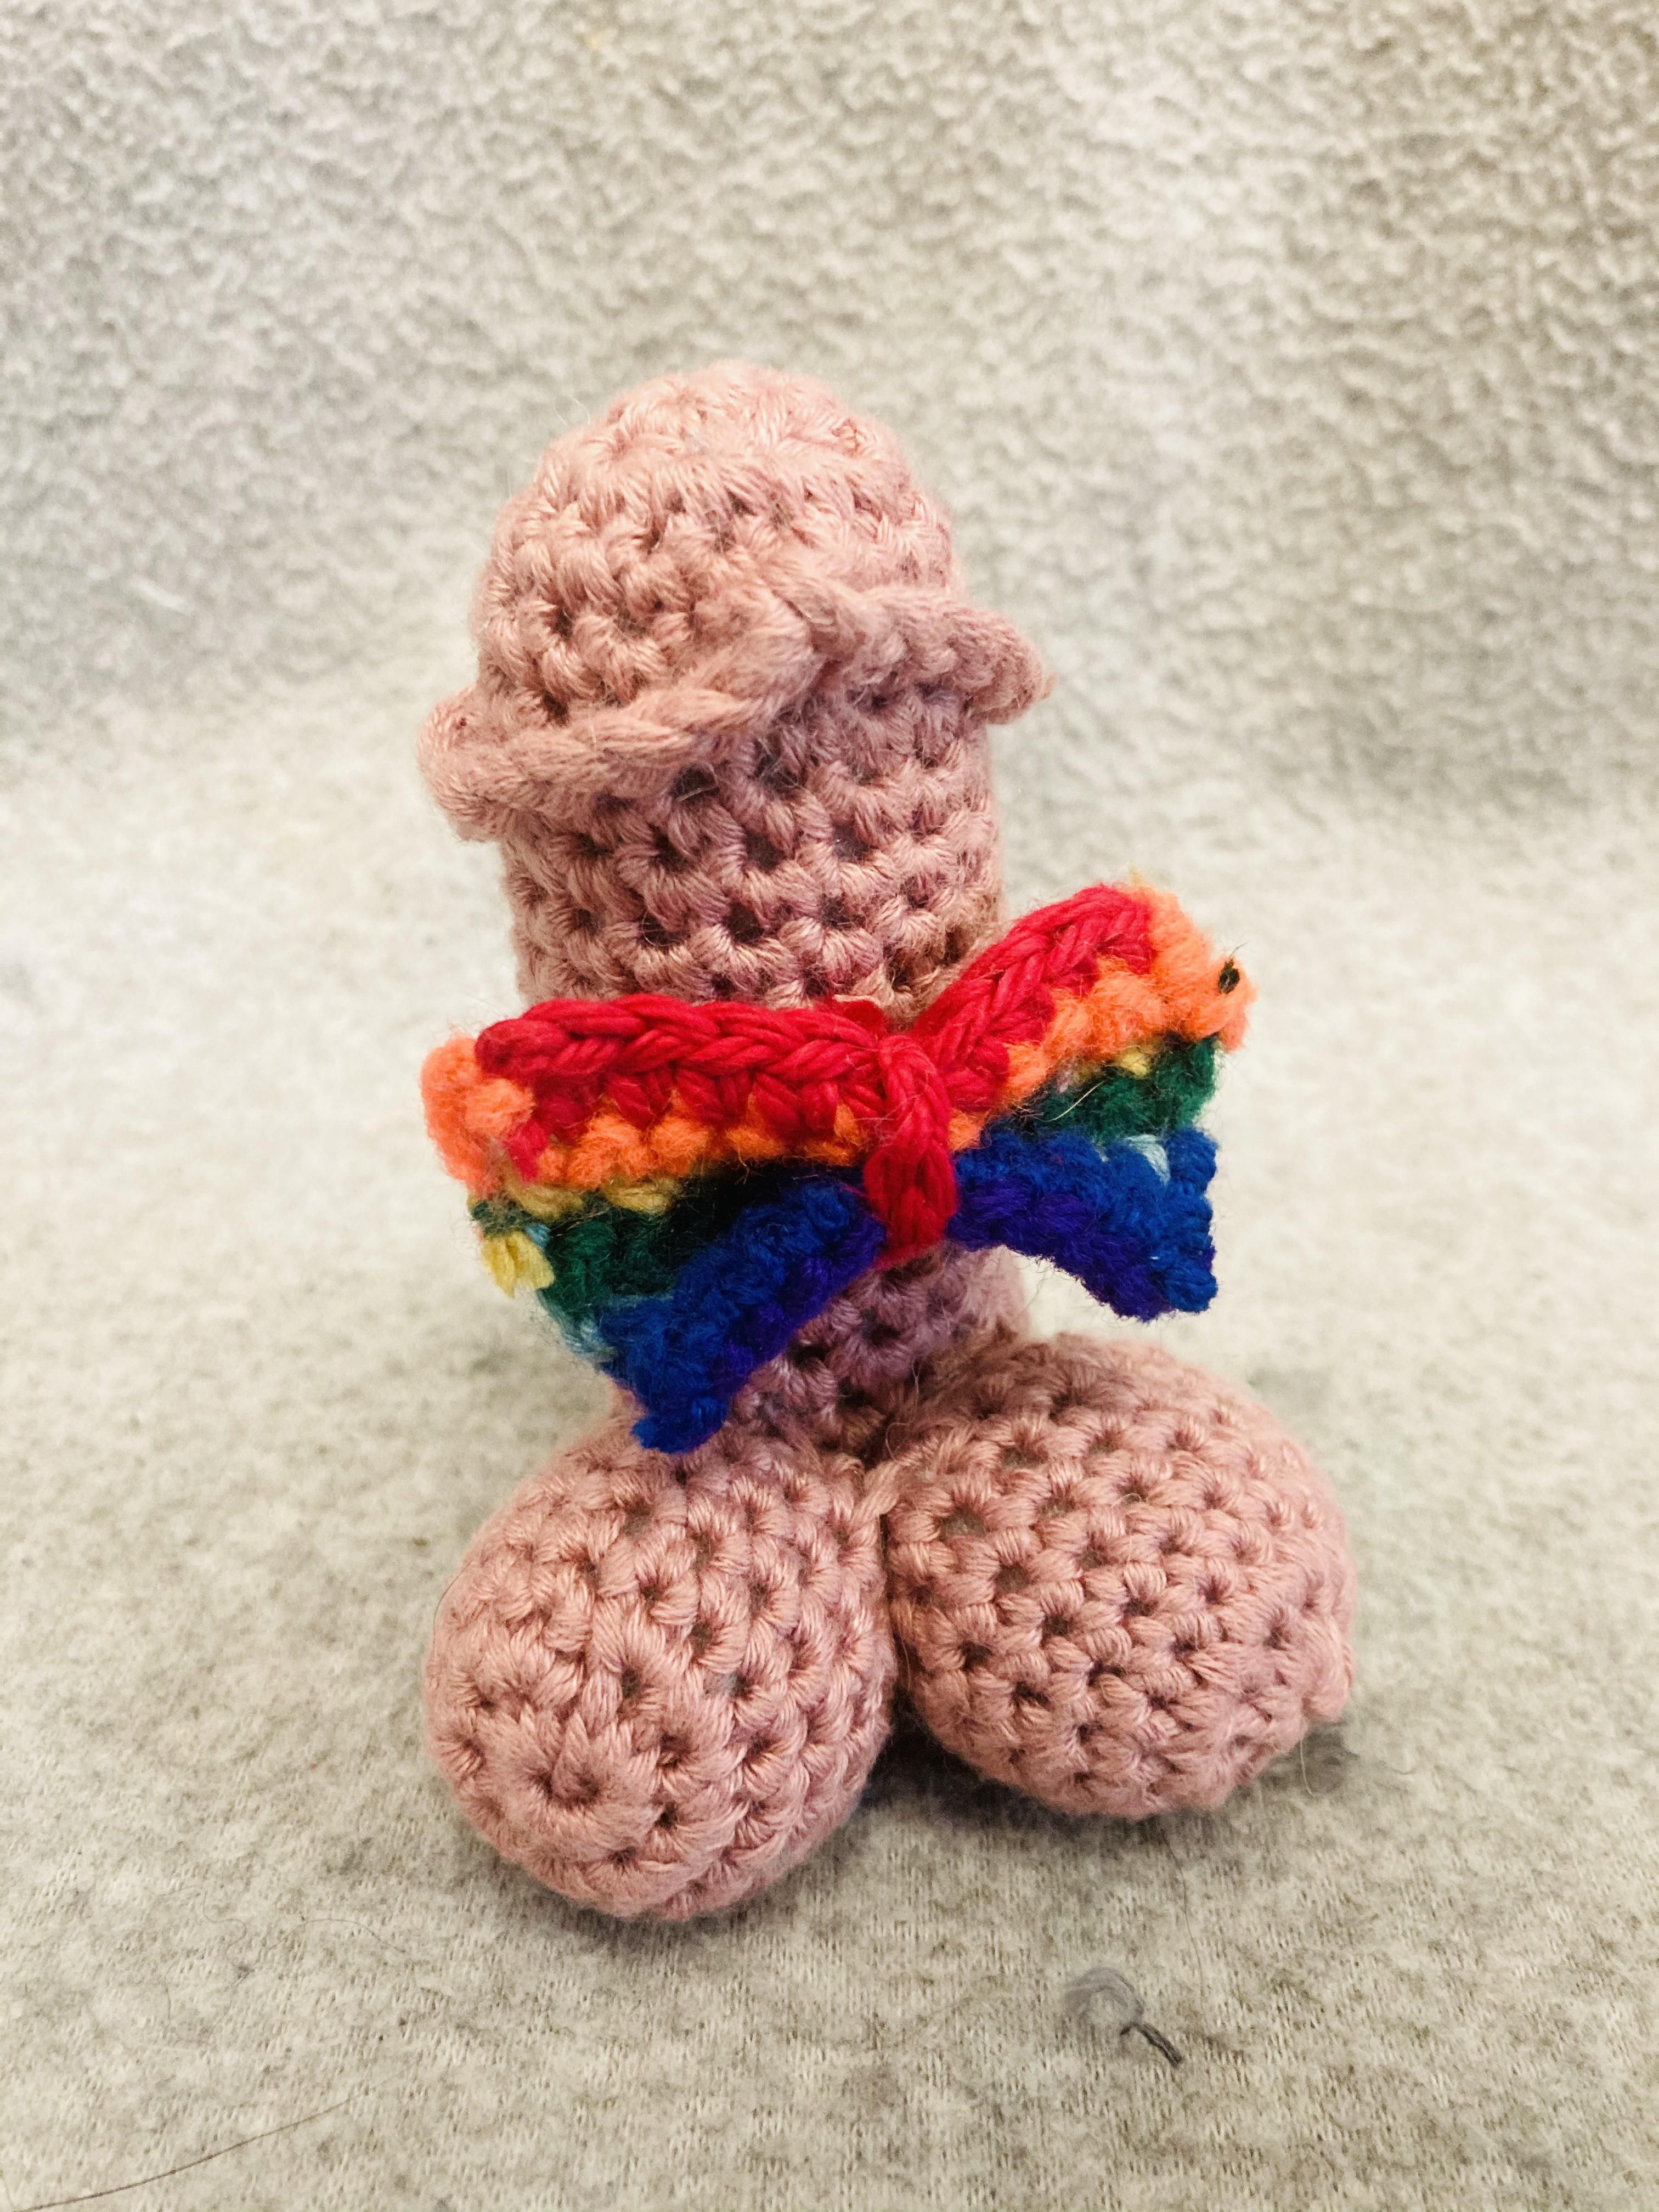 I offered a woman a crochet peen for her couch. Someone else wanted it. I made it, shared it and it blew up. Now I make my living selling crochet disco sticks. I call them Dapper Doinks.